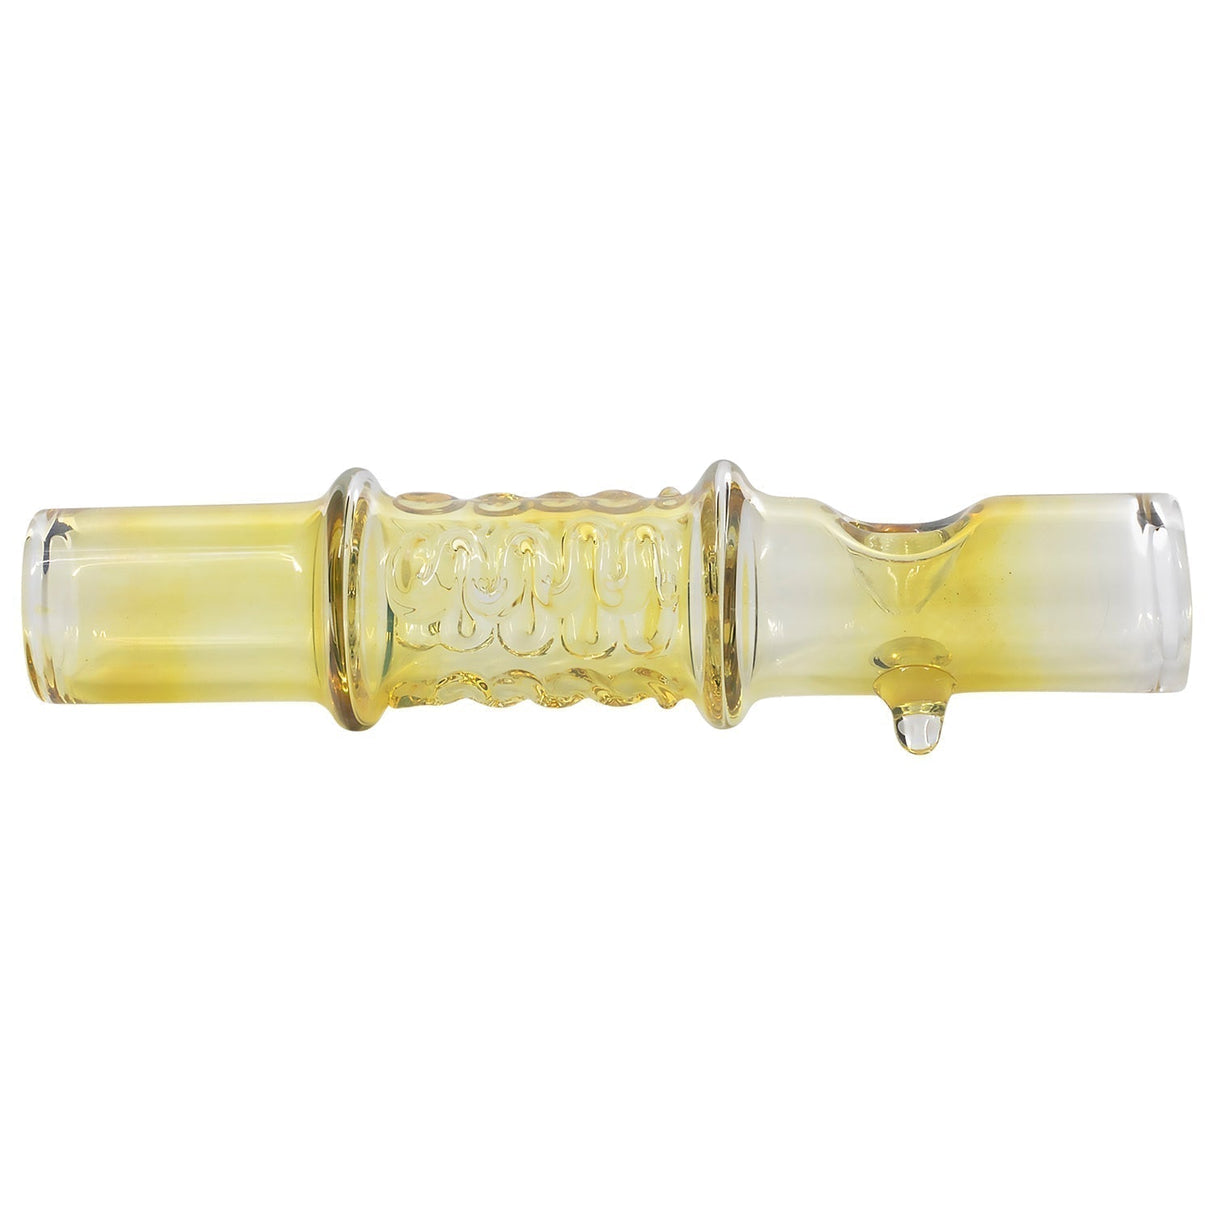 LA Pipes Silver Fumed Steamroller - 5" Compact Borosilicate Glass Hand Pipe with Color Changing Design